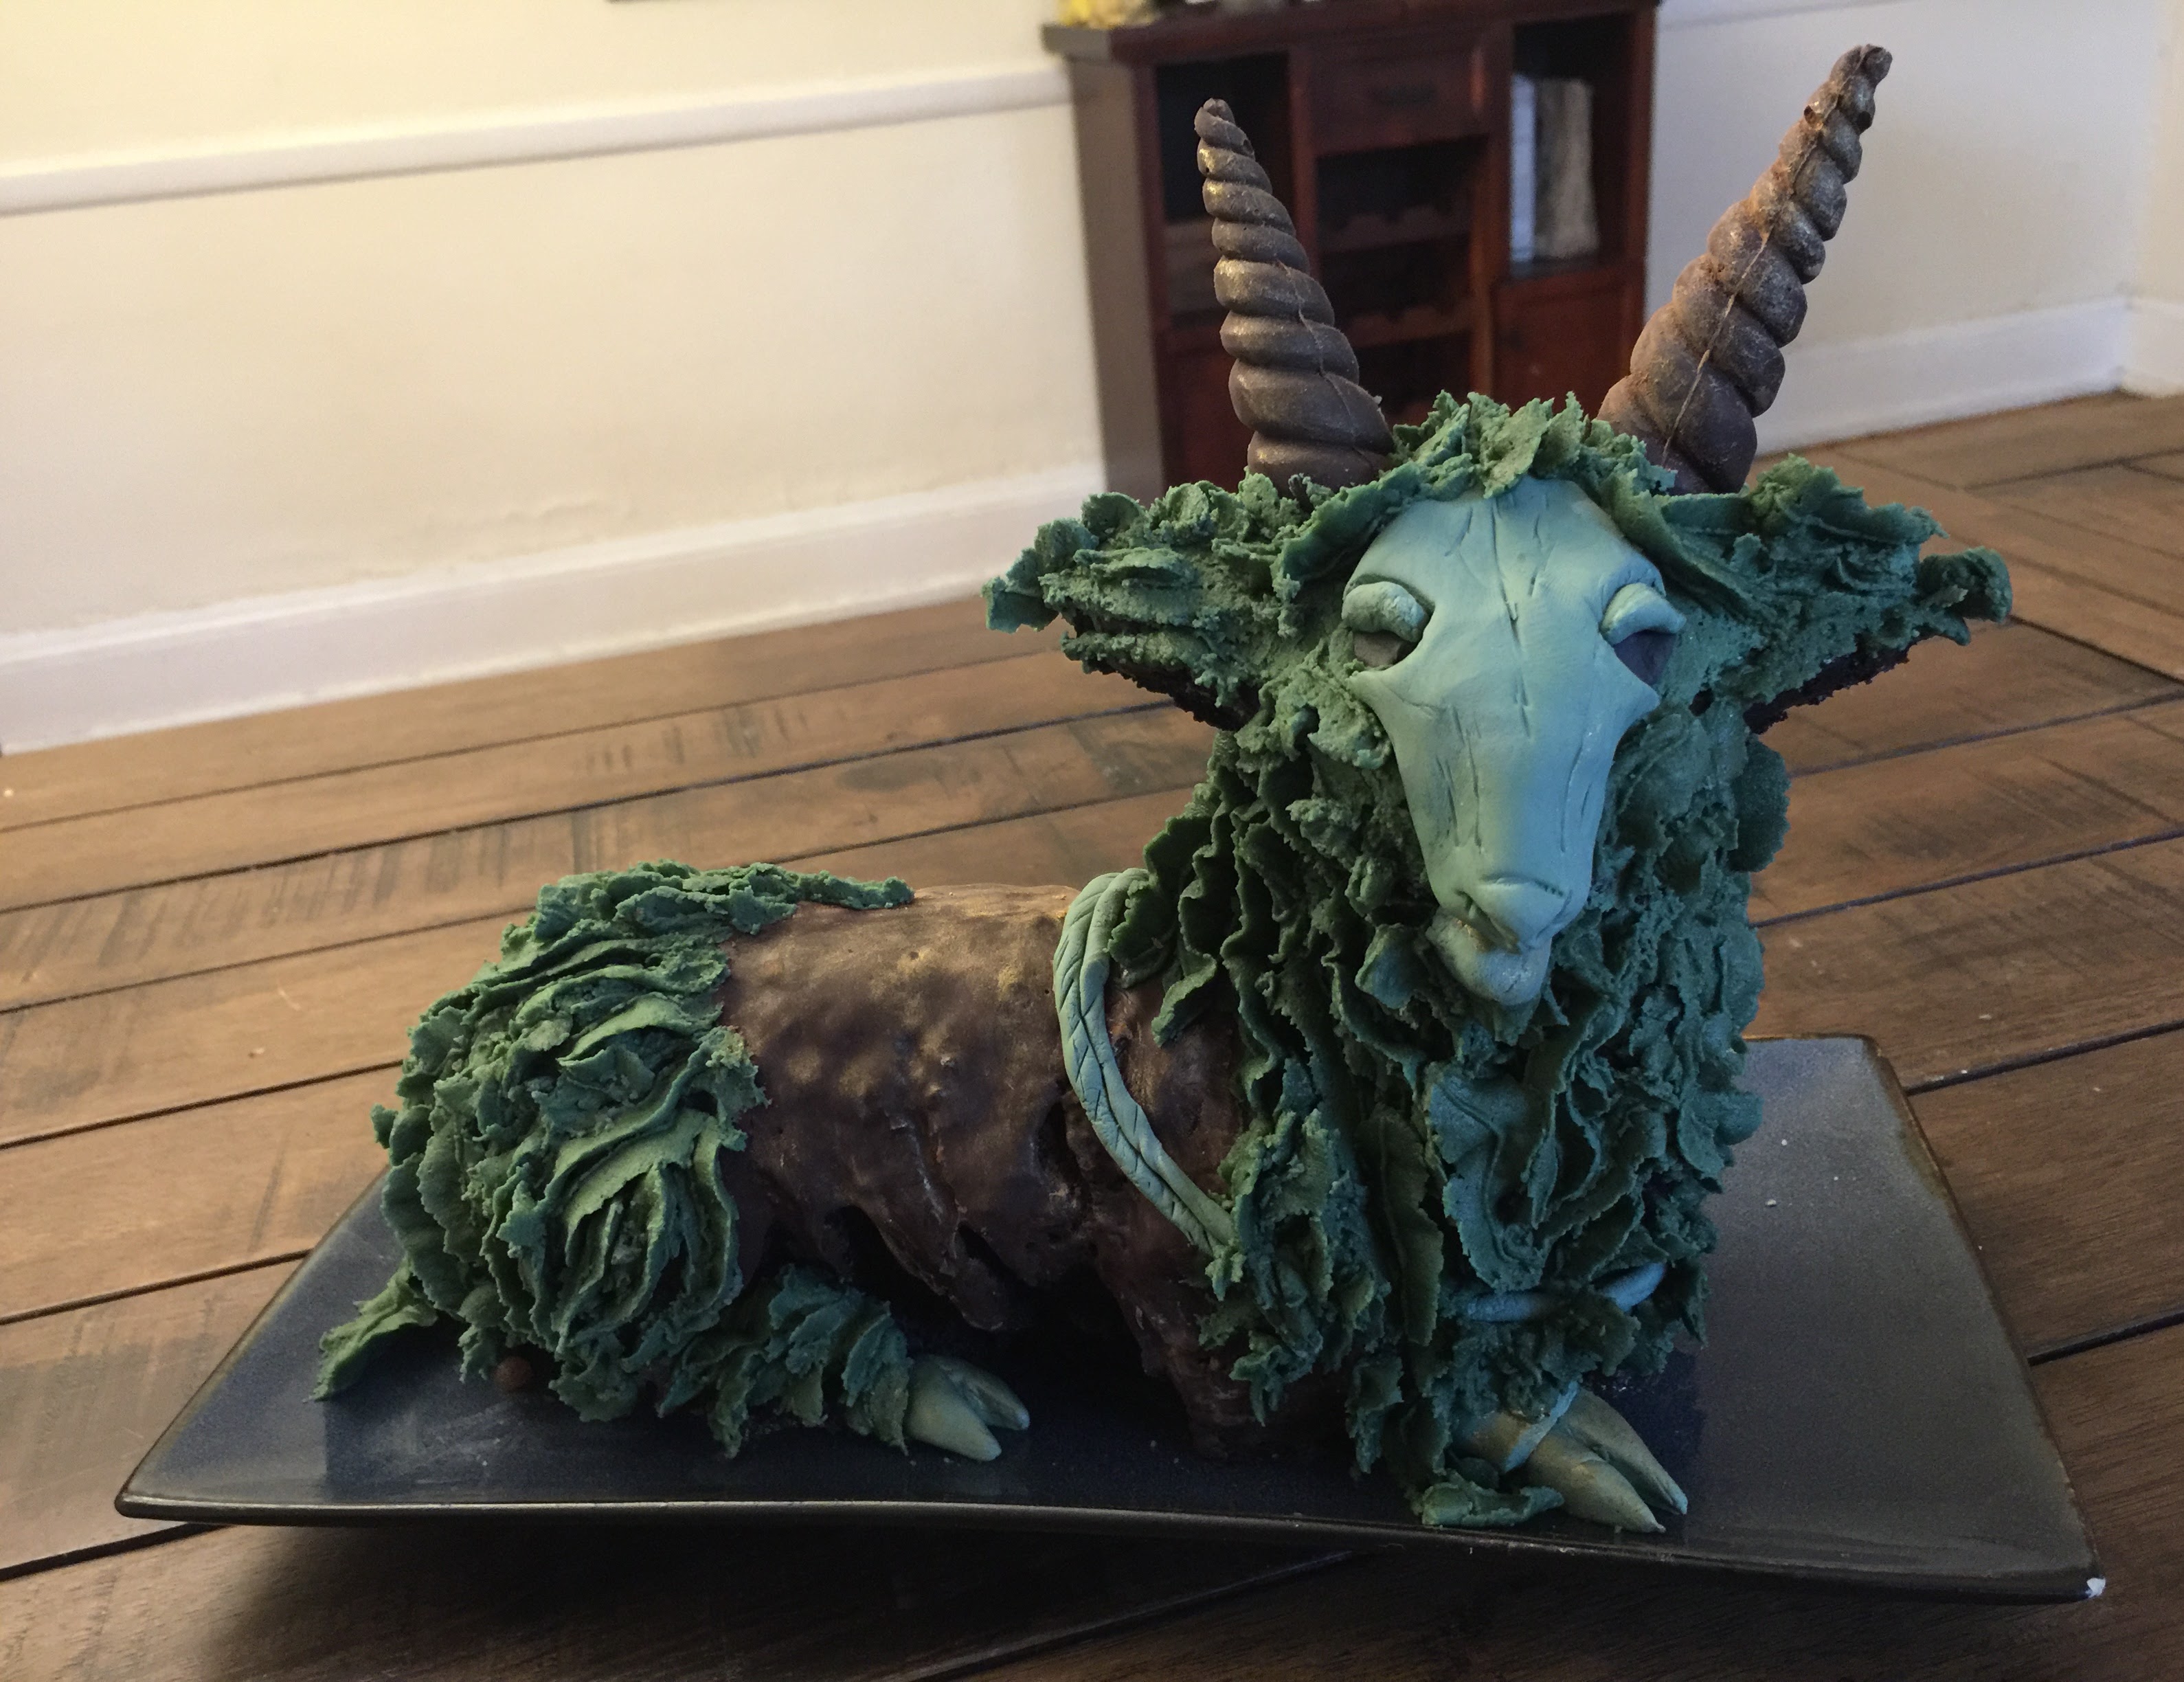 A cake in the shape of Addremelech, rather obviously baked in an easter lamb cake pan.